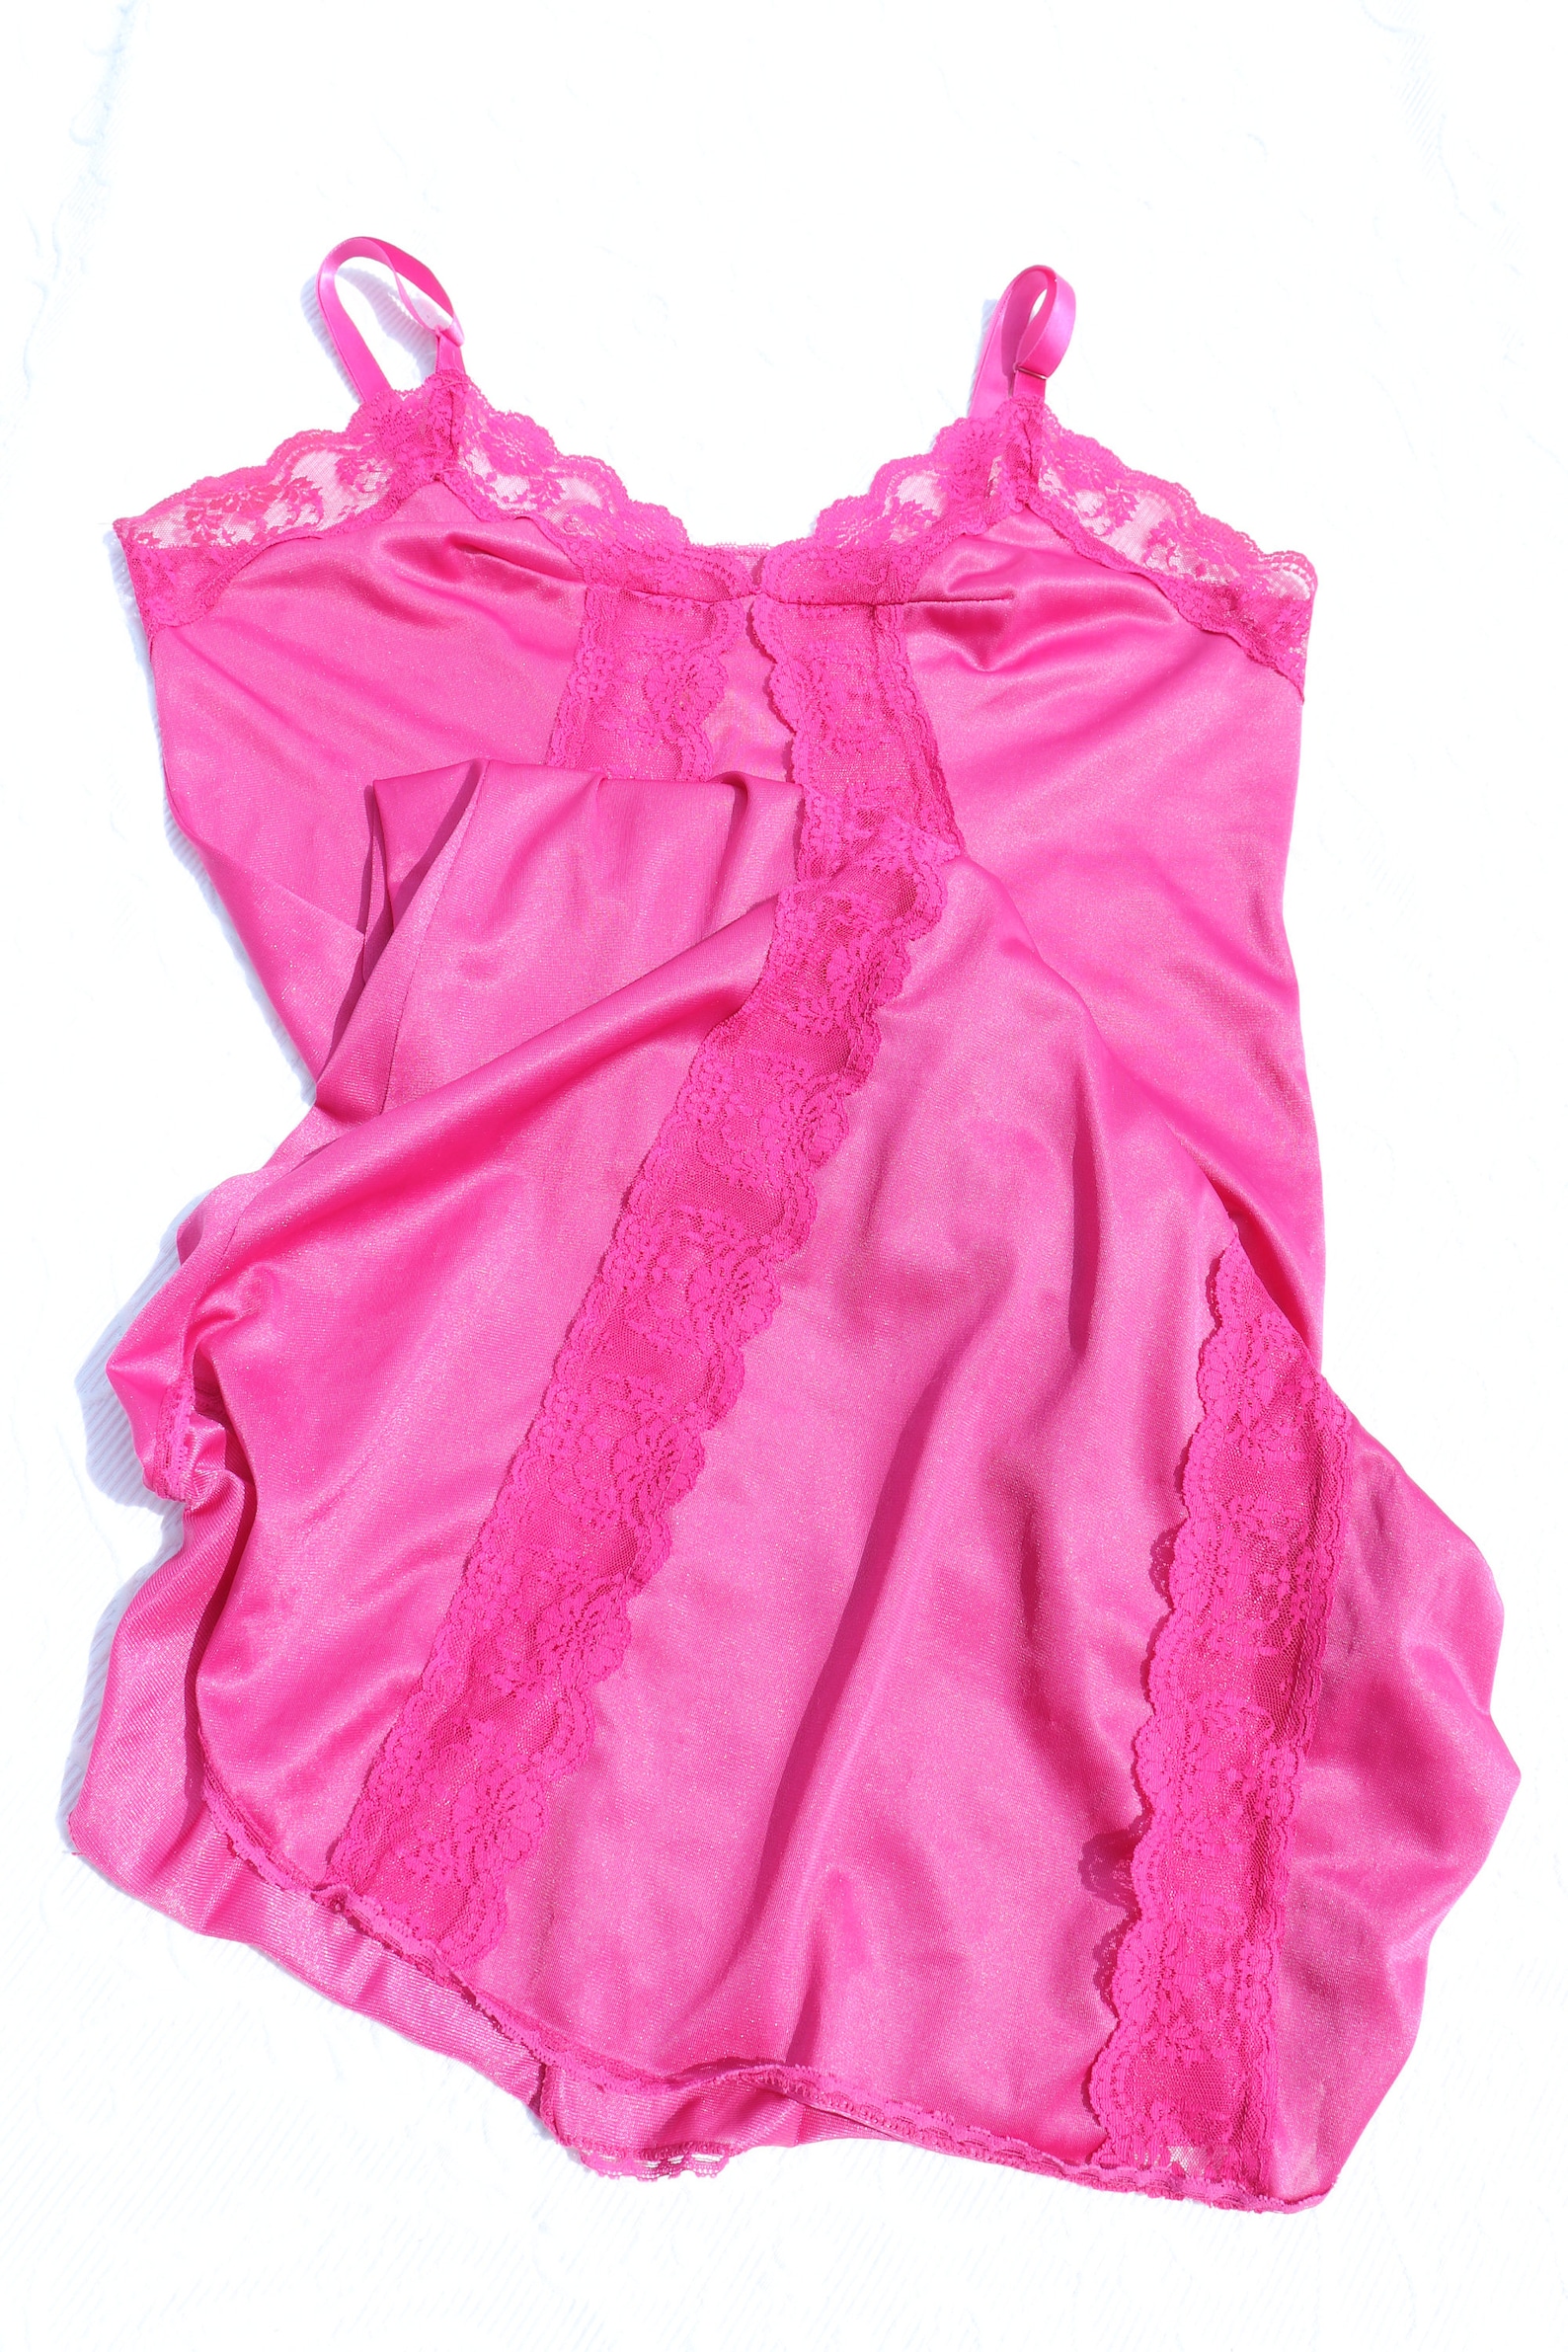 Movie Star Vintage Negligee in Hot Pink / Romantic Gift / - Etsy